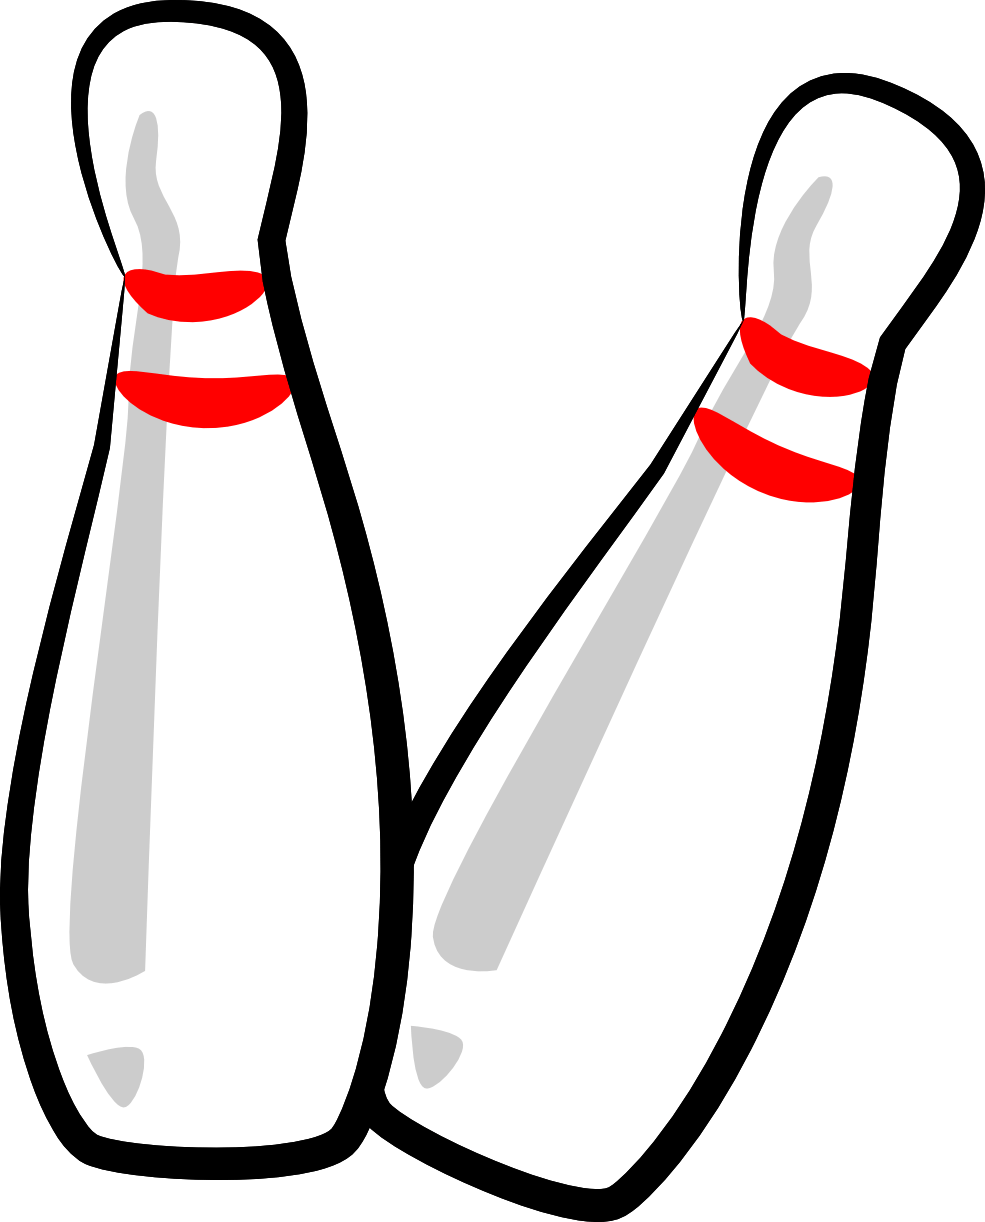 Bowling Alley Clipart Group Clip Art